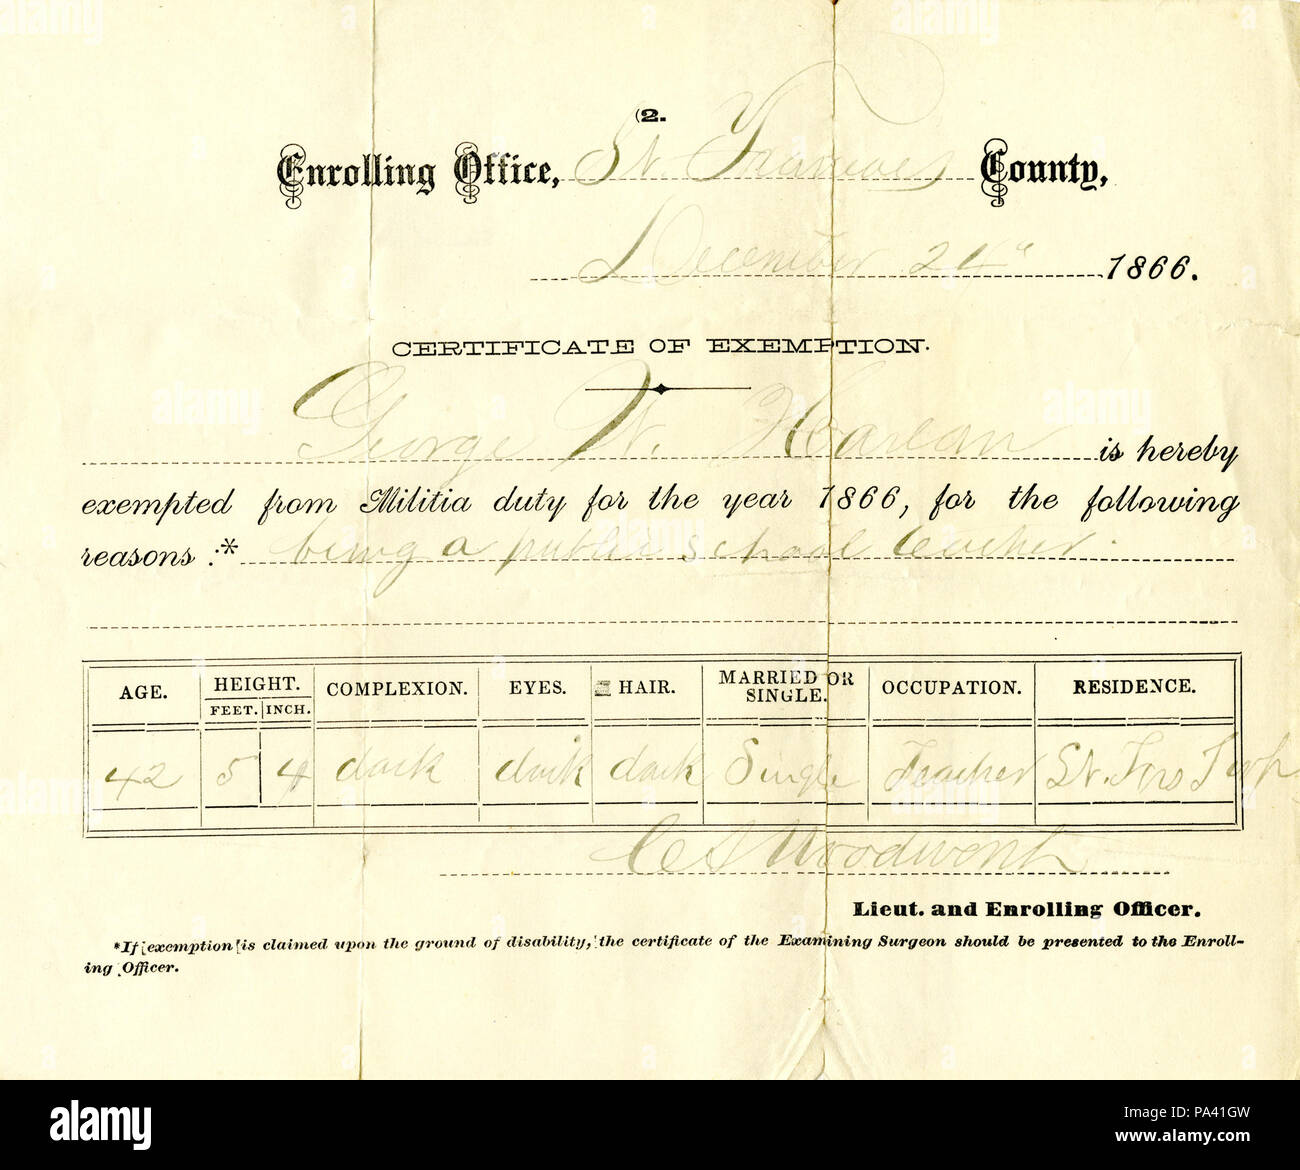 294 Certificate of exemption of George W. Harlan, Enrolling Office, St. Francois County, December 24, 1866 Stock Photo